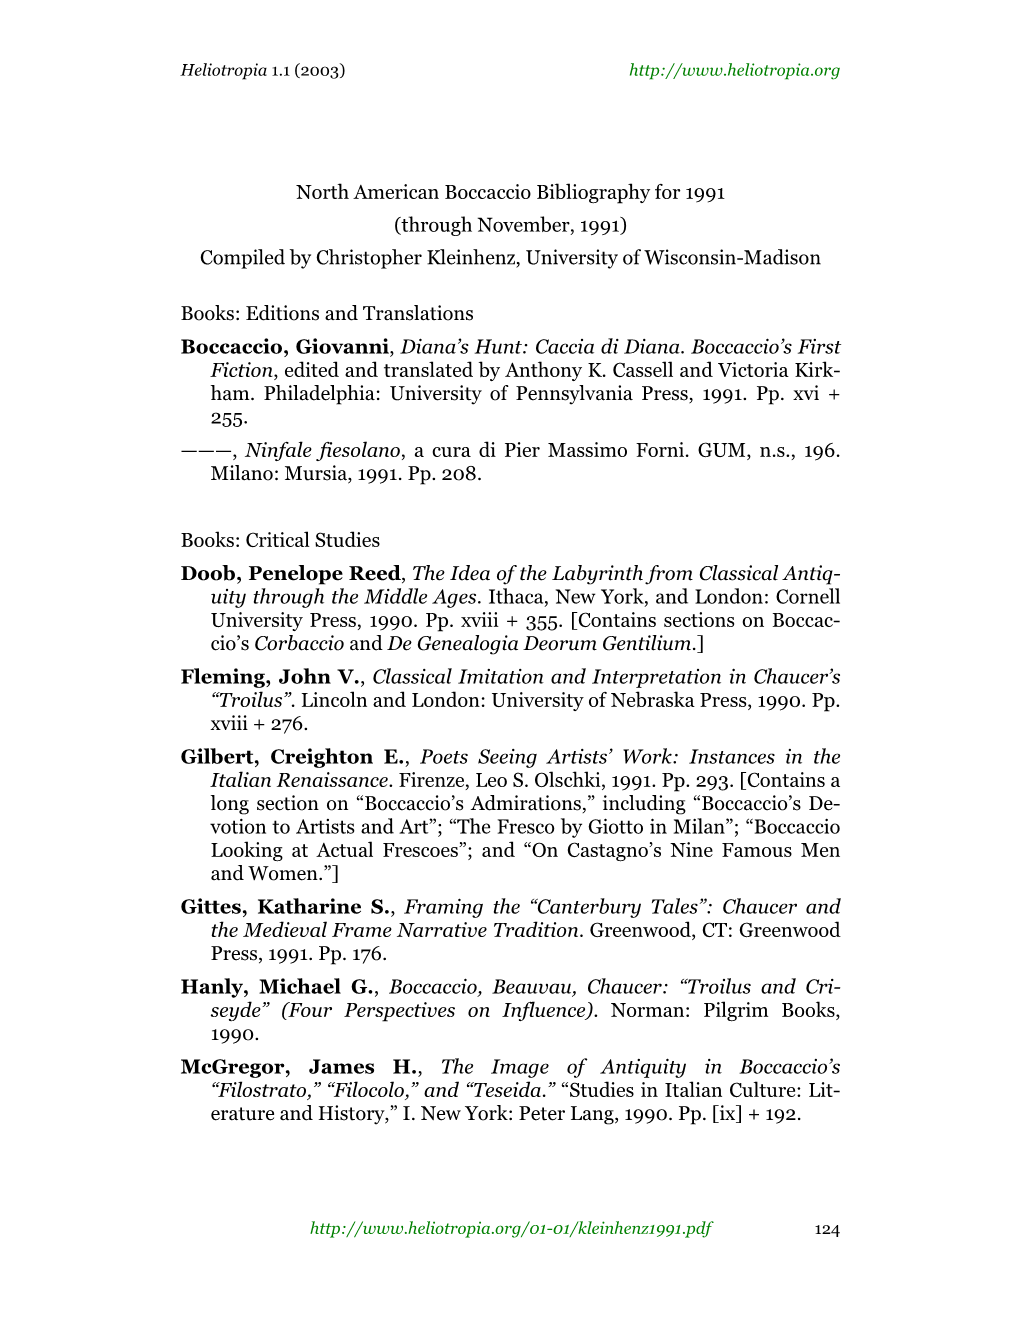 North American Boccaccio Bibliography for 1991 (Through November, 1991) Compiled by Christopher Kleinhenz, University of Wisconsin-Madison